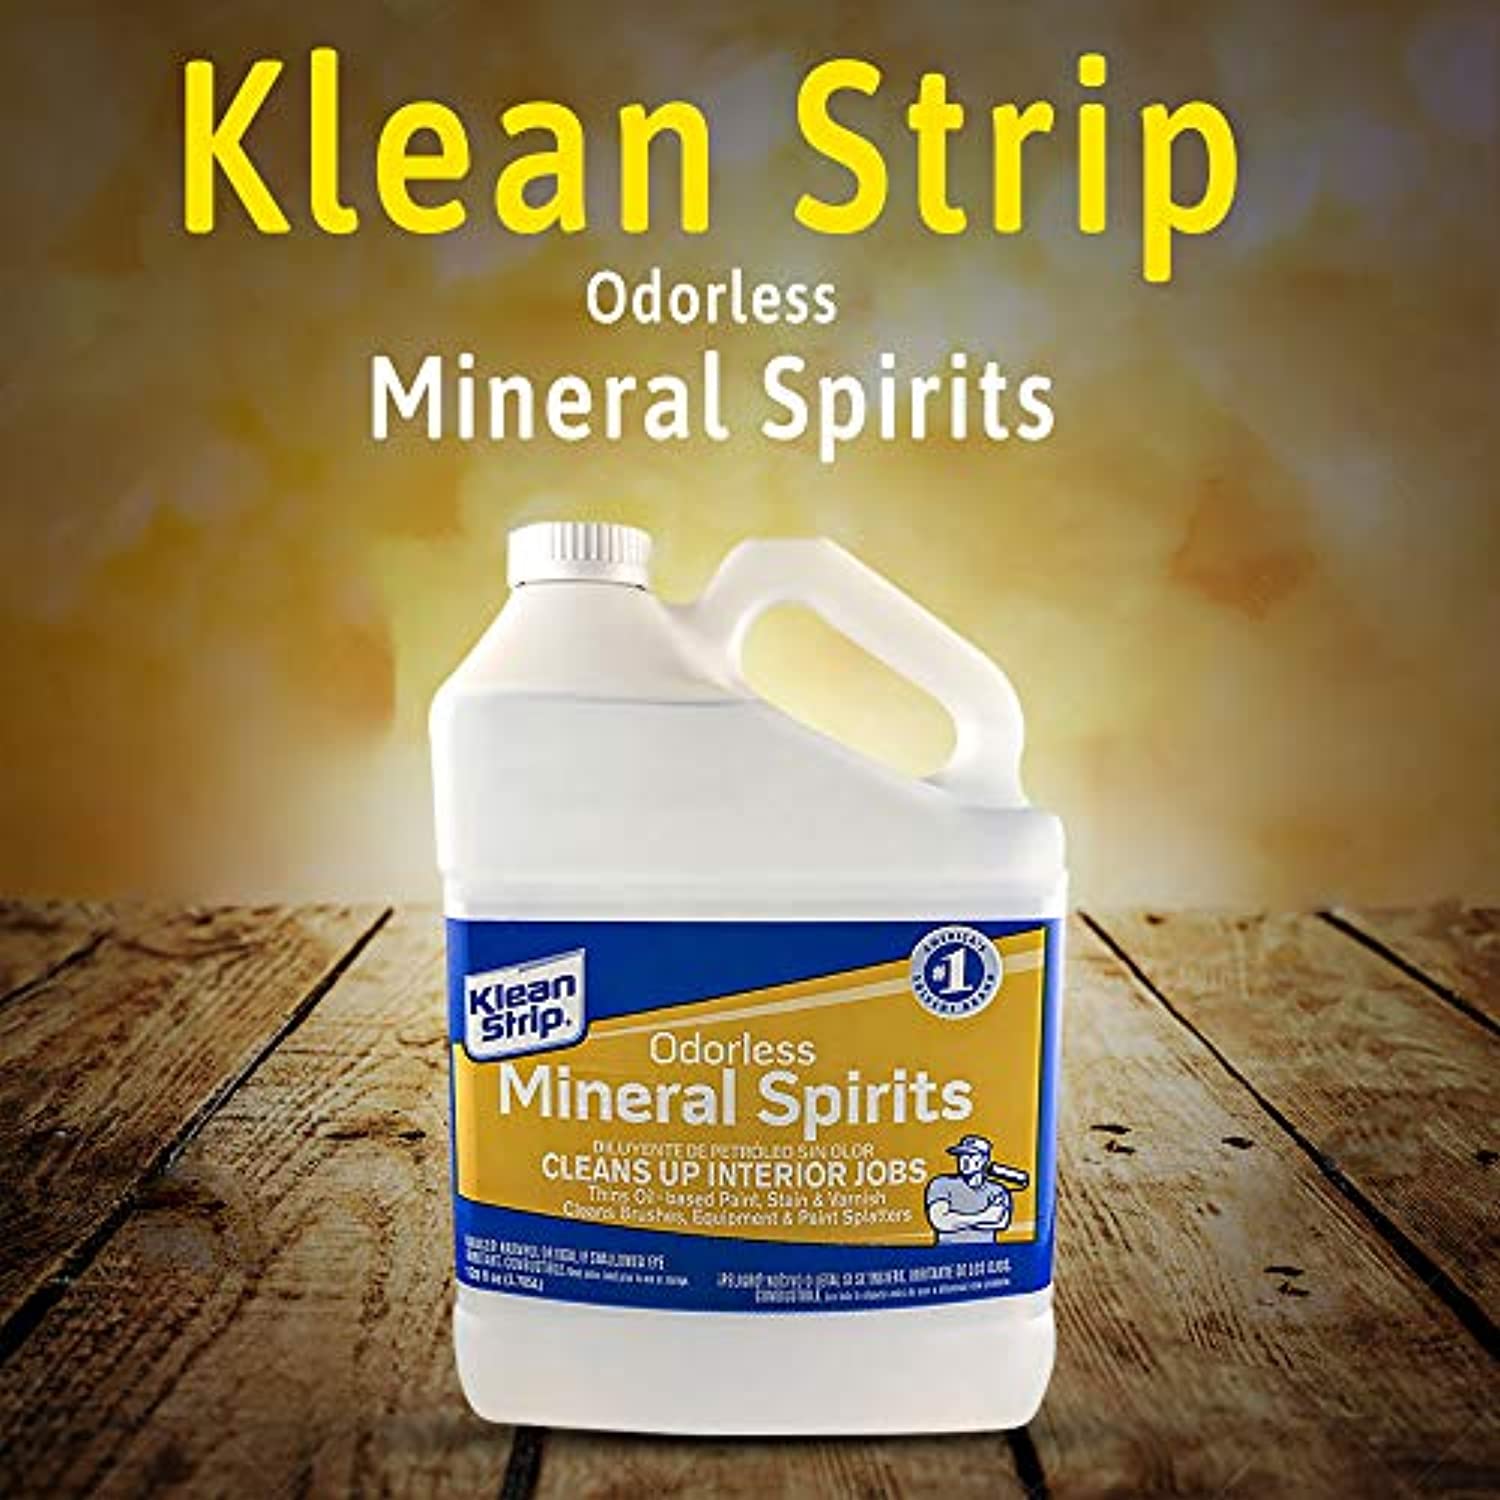 Klean Strip Odorless Mineral Spirits Non-Toxic Formula Wood Restoration Degrease Automotive Wipes Off Price Tag Residue Parts Now Comes with Chemical Resistant Gloves by Centaurus AZ, 1 Gallon